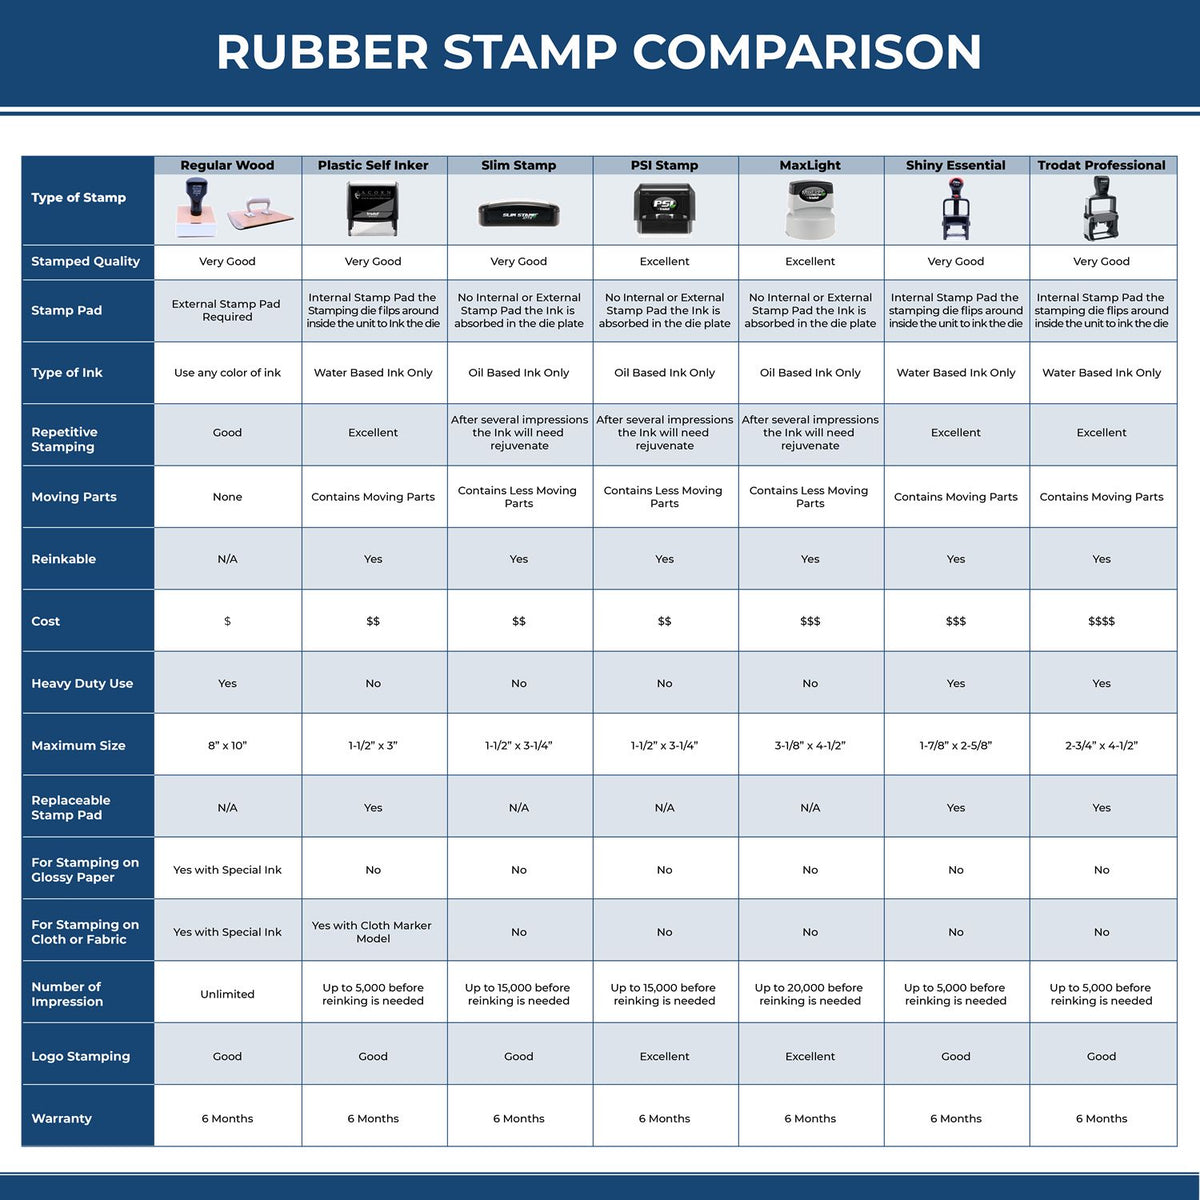 Large Self Inking Clients Copy Stamp 4607S Rubber Stamp Comparison